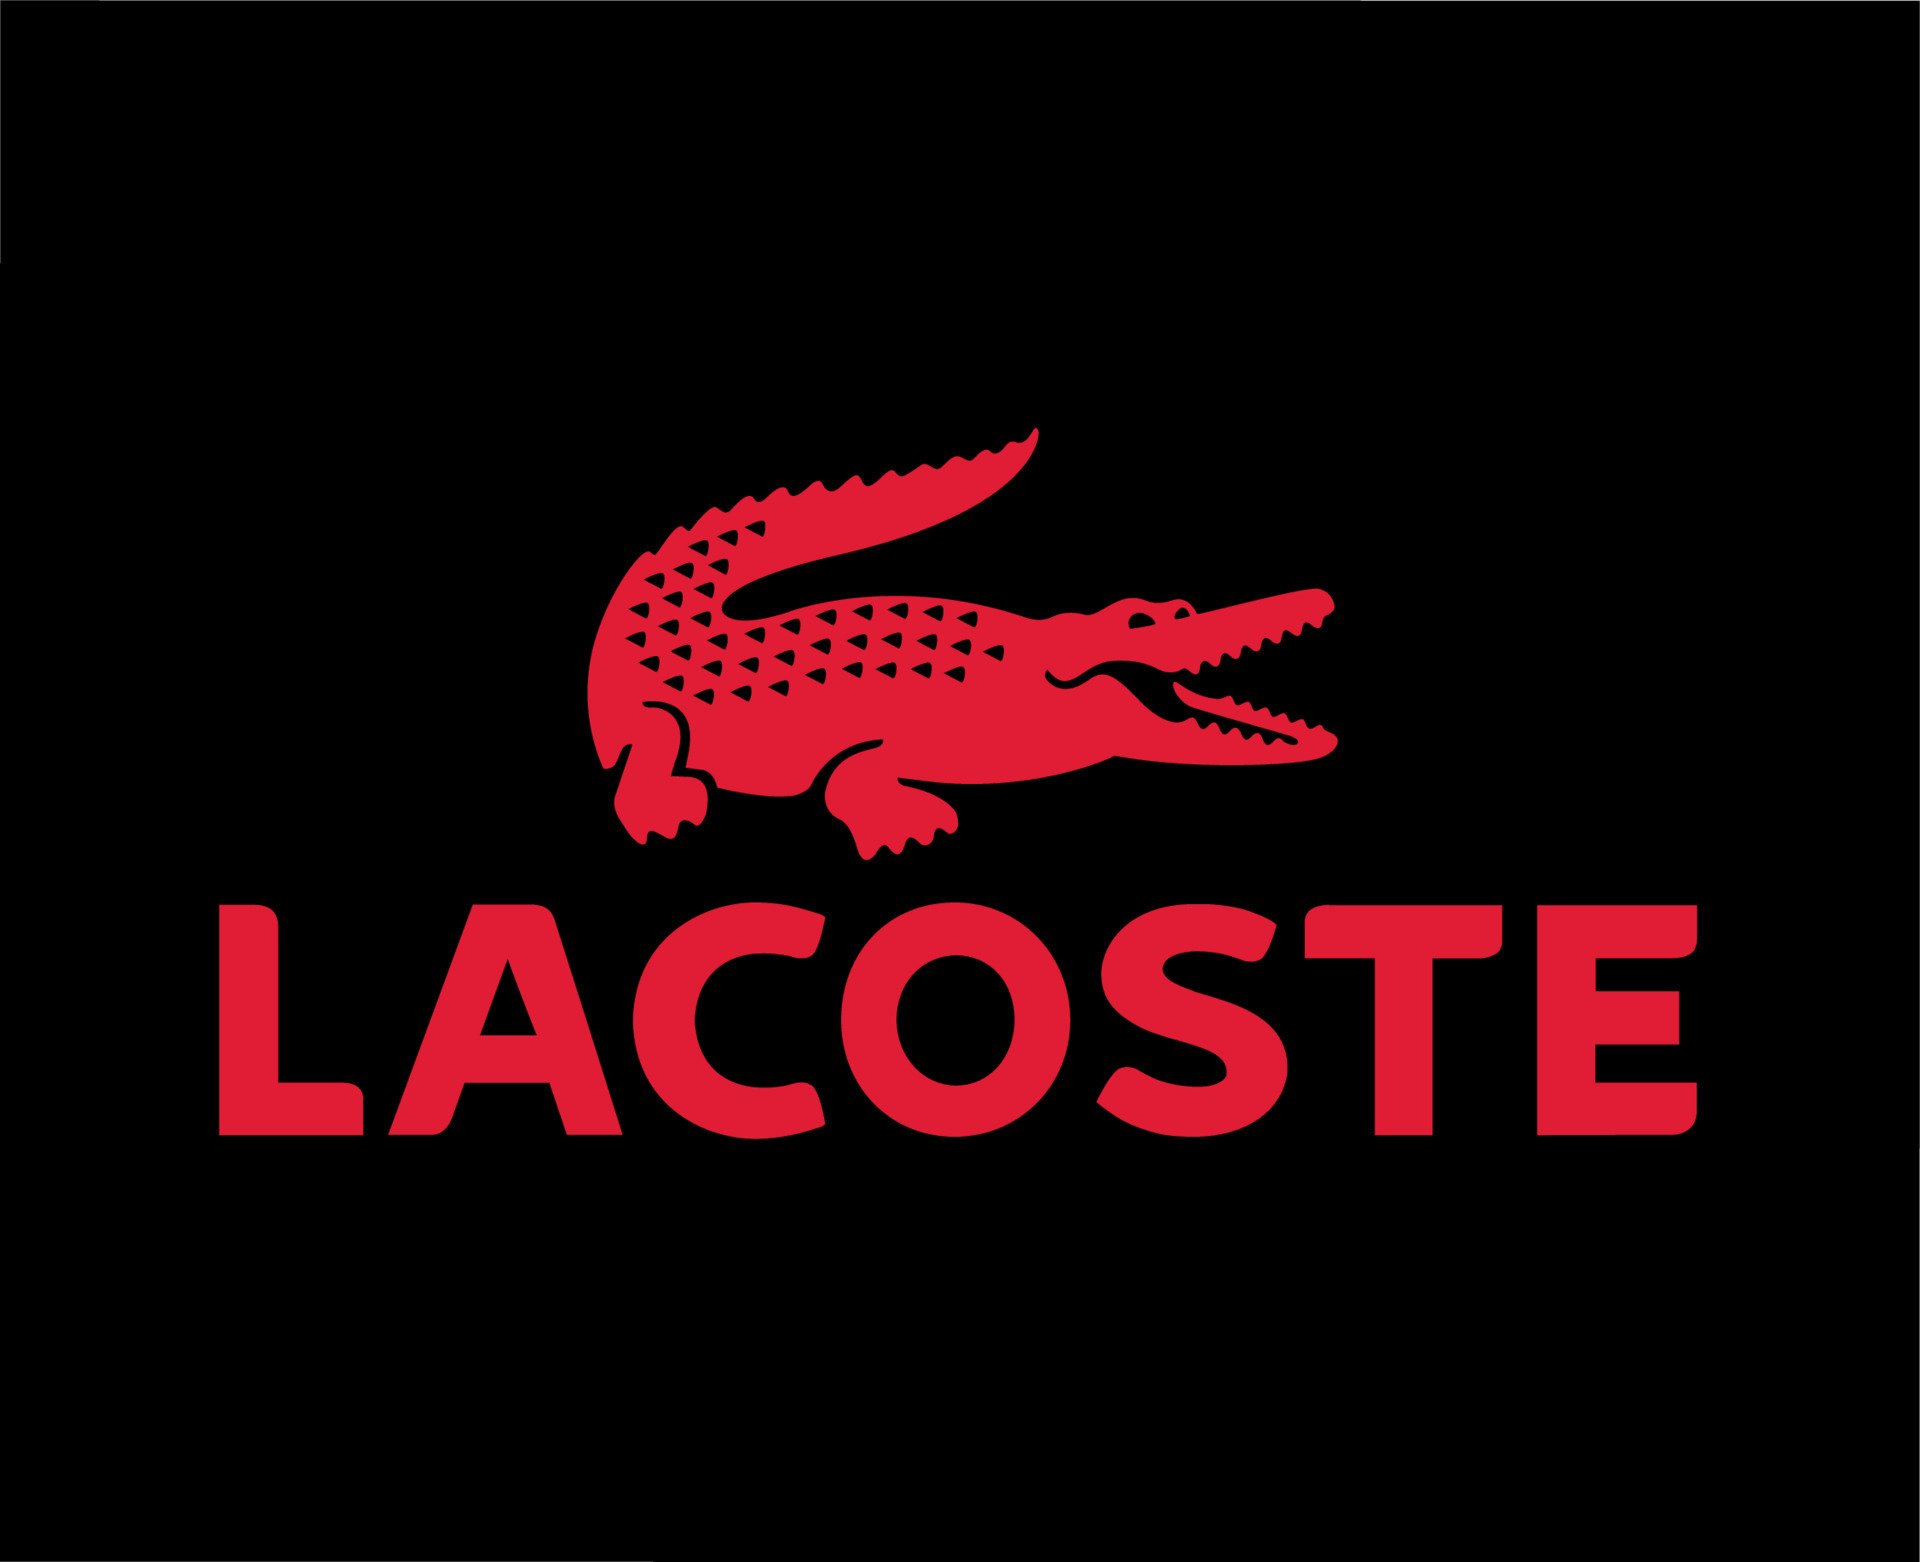 Lacoste Brand Logo Symbol Red Design Clothes Fashion Vector Illustration  With Black Background 23871190 Vector Art at Vecteezy